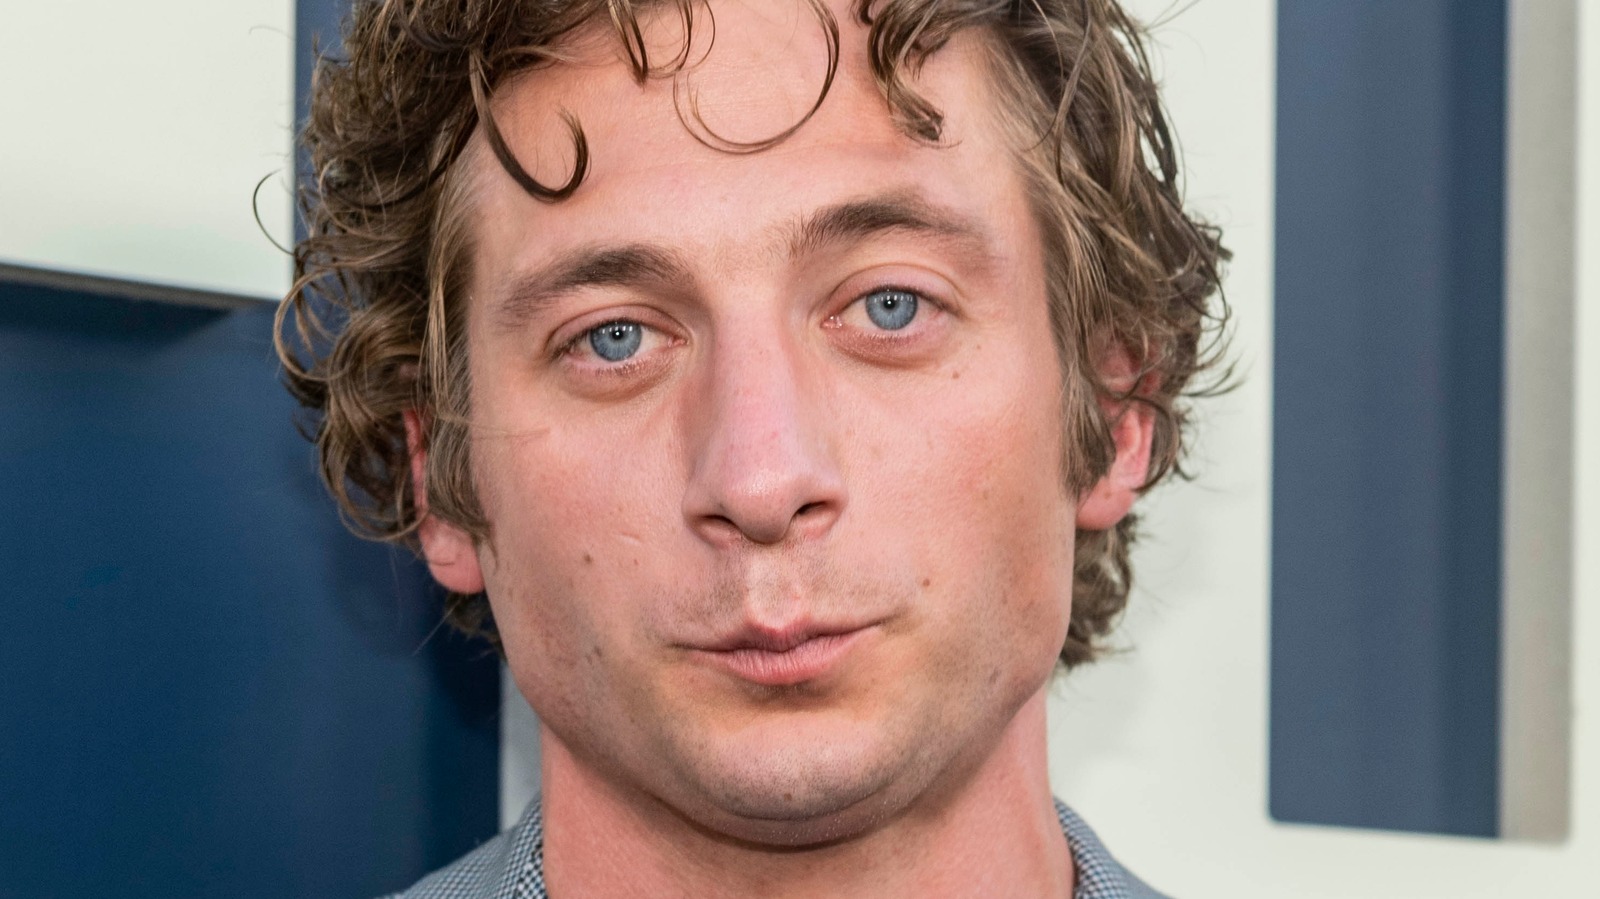 Jeremy Allen White Agrees To Alcohol Testing For The Sake Of Seeing His Kids